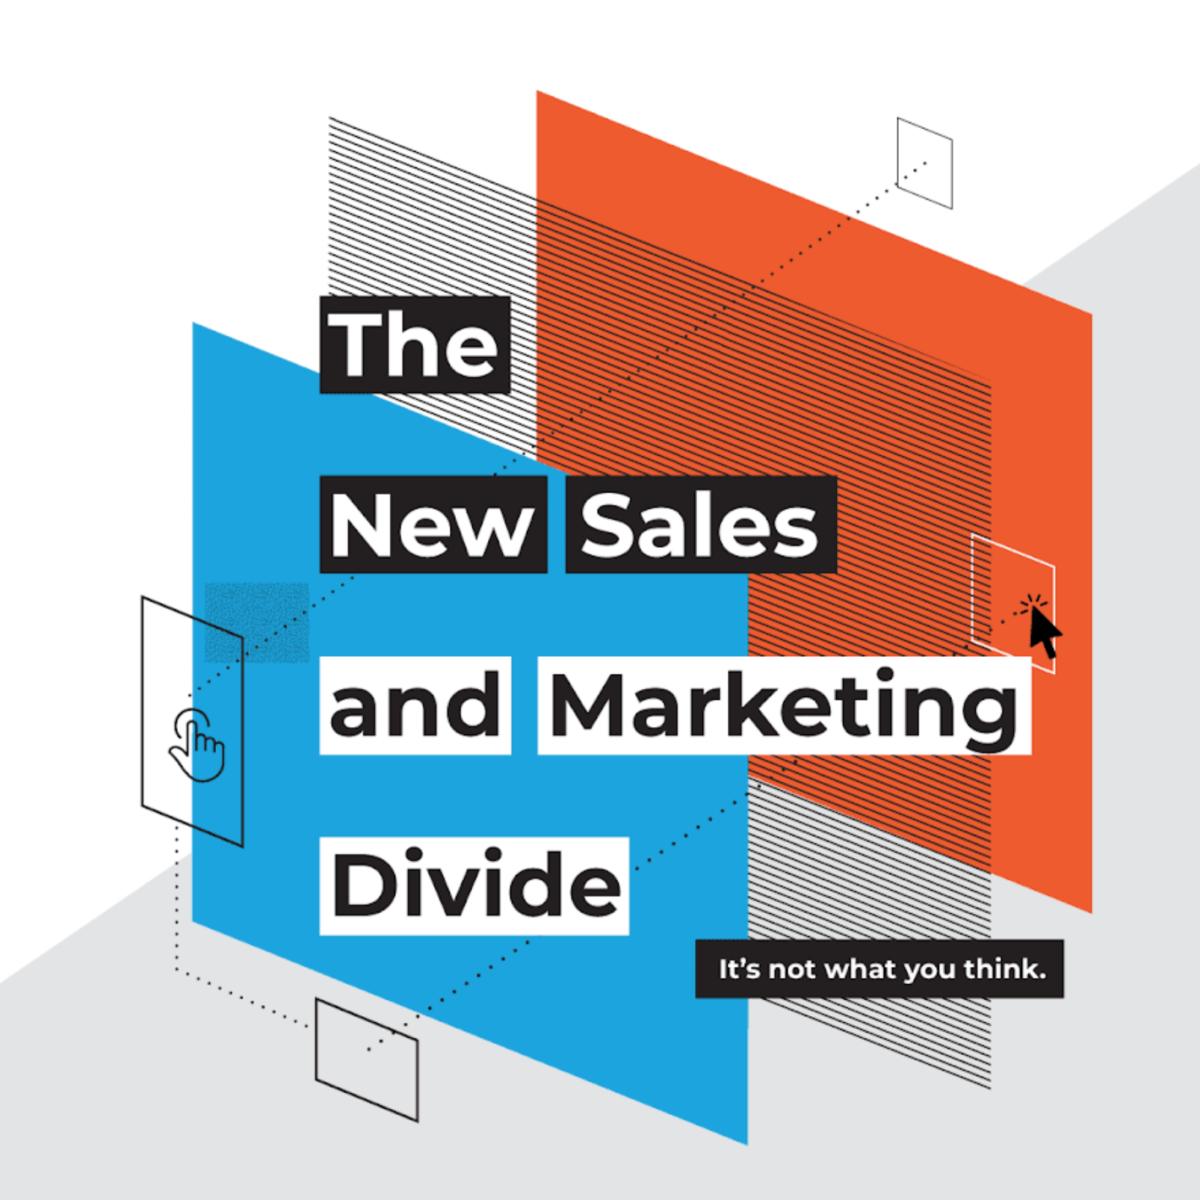 B2B Market Research: The New Sales and Marketing Divide